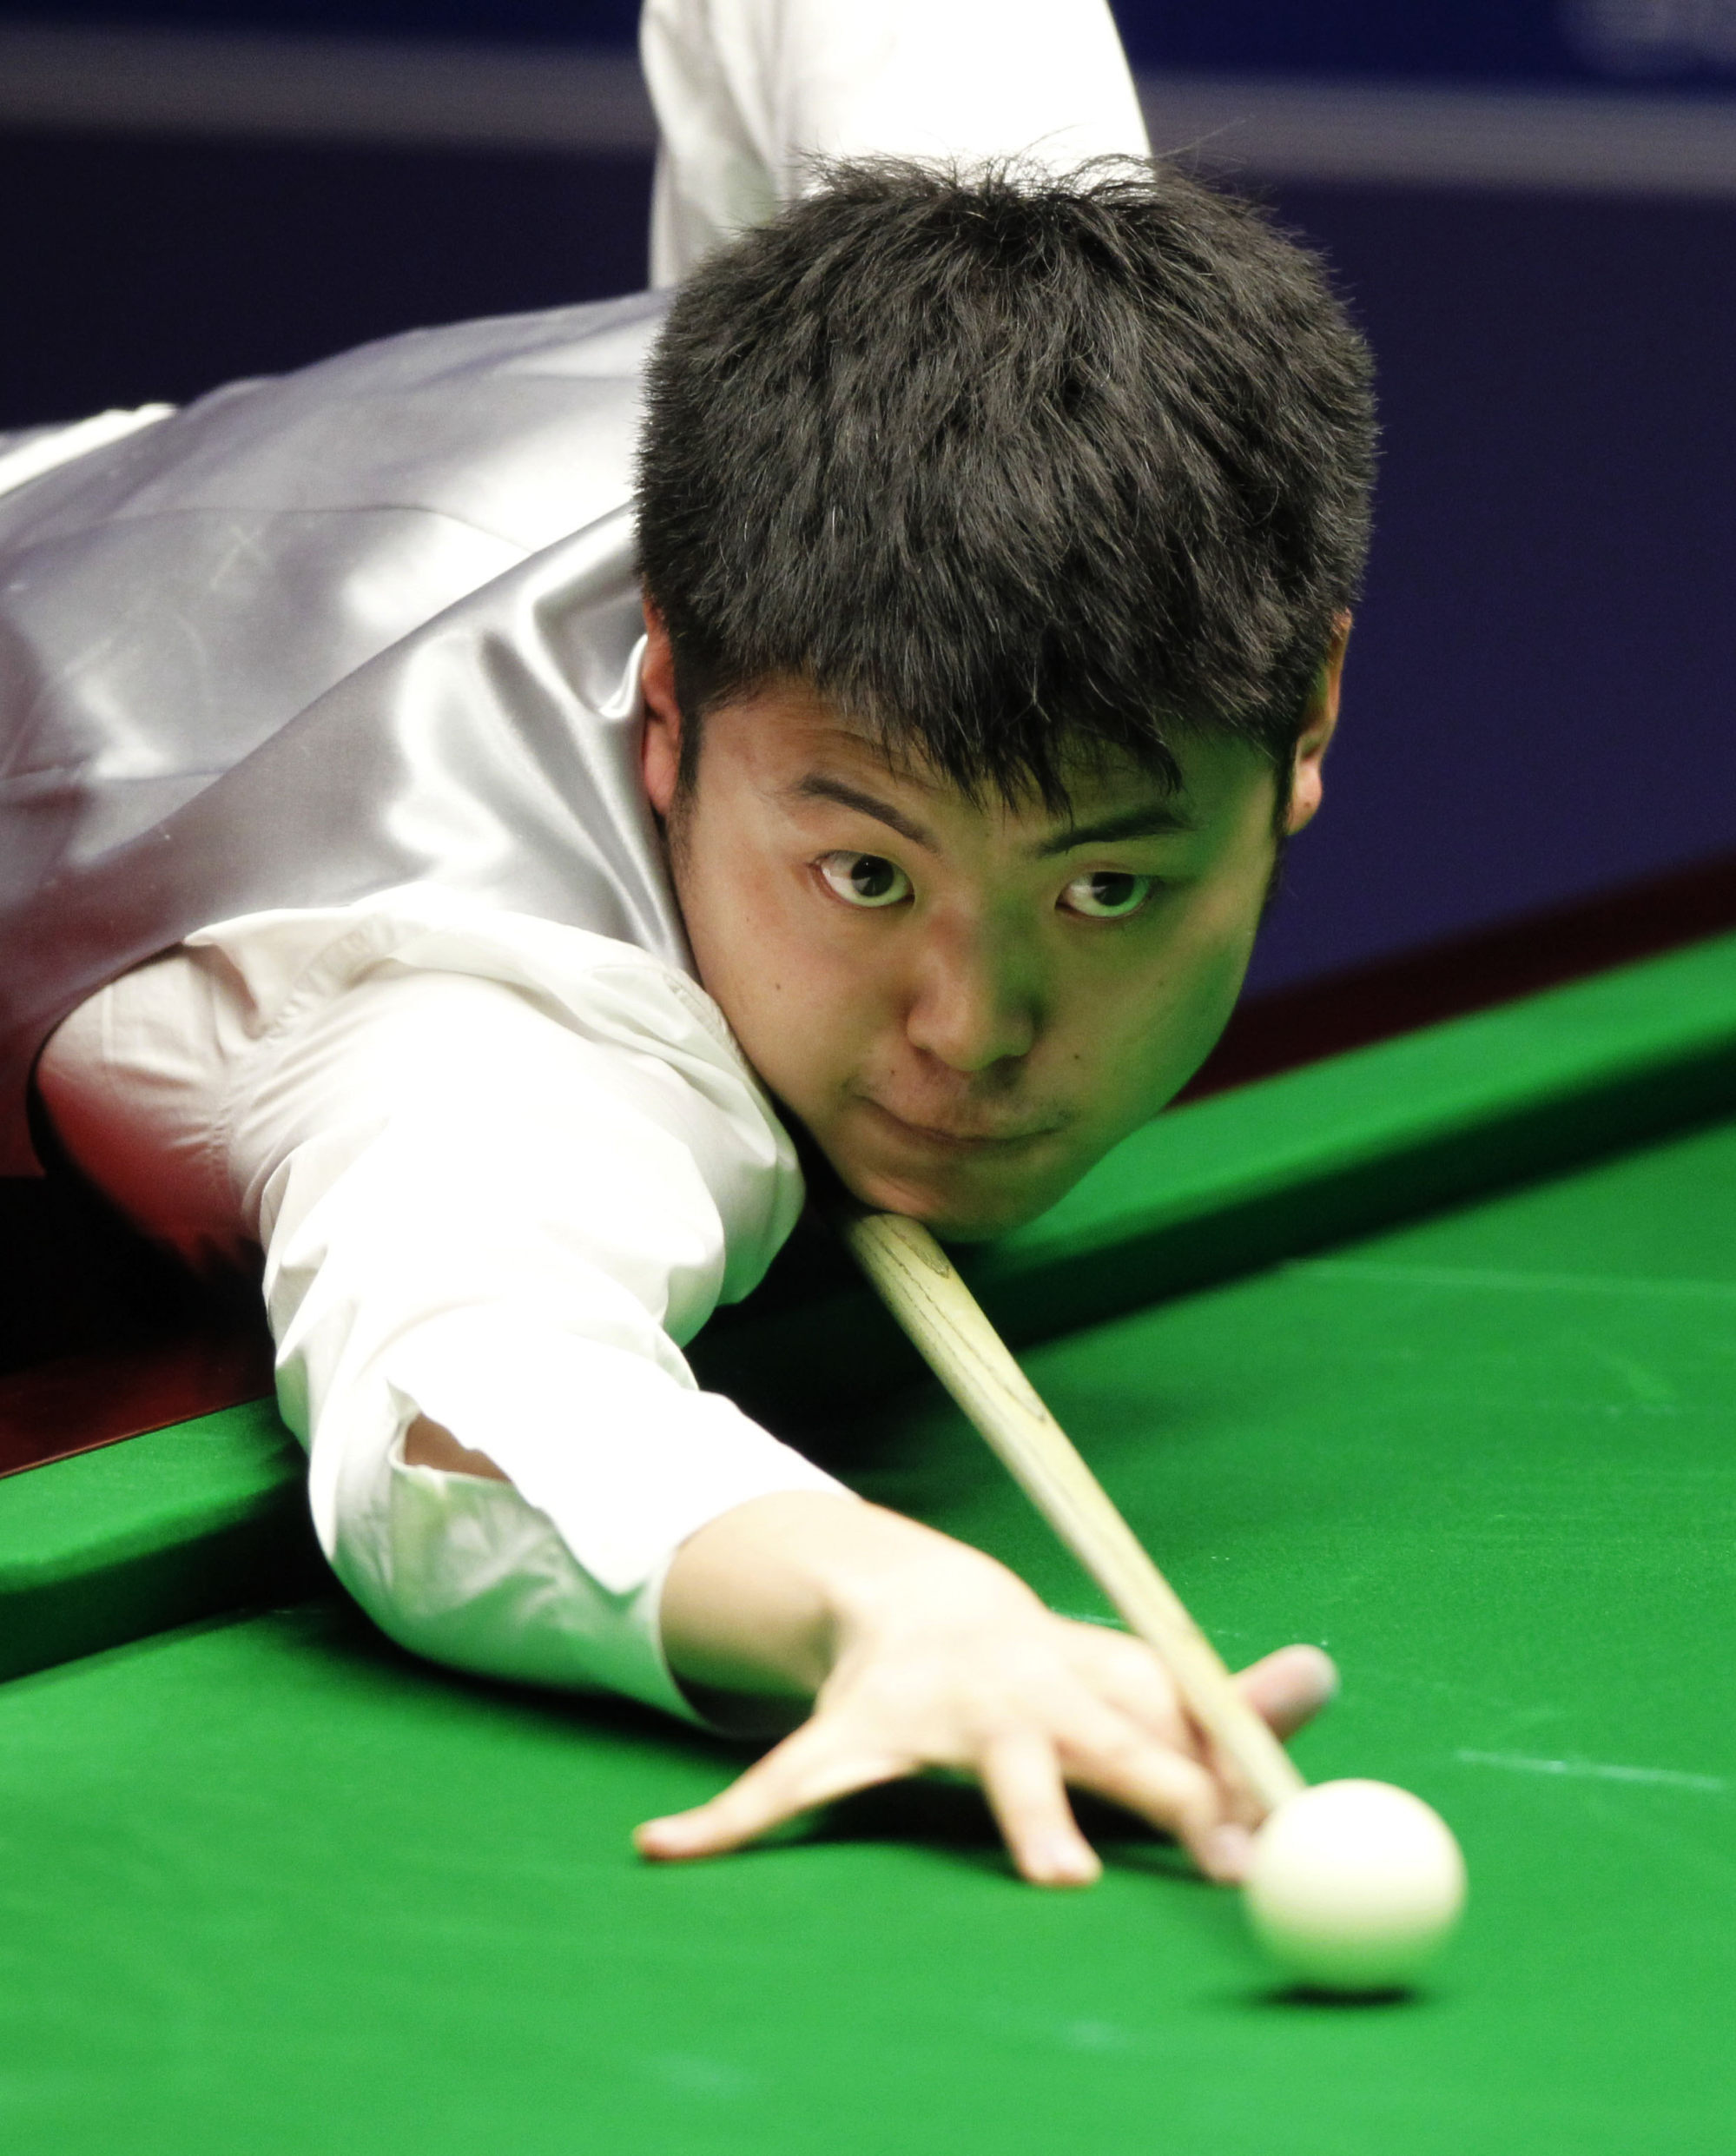 Chinas 4 contenders at 2022 World Snooker Championship who are they and how can I watch them? South China Morning Post